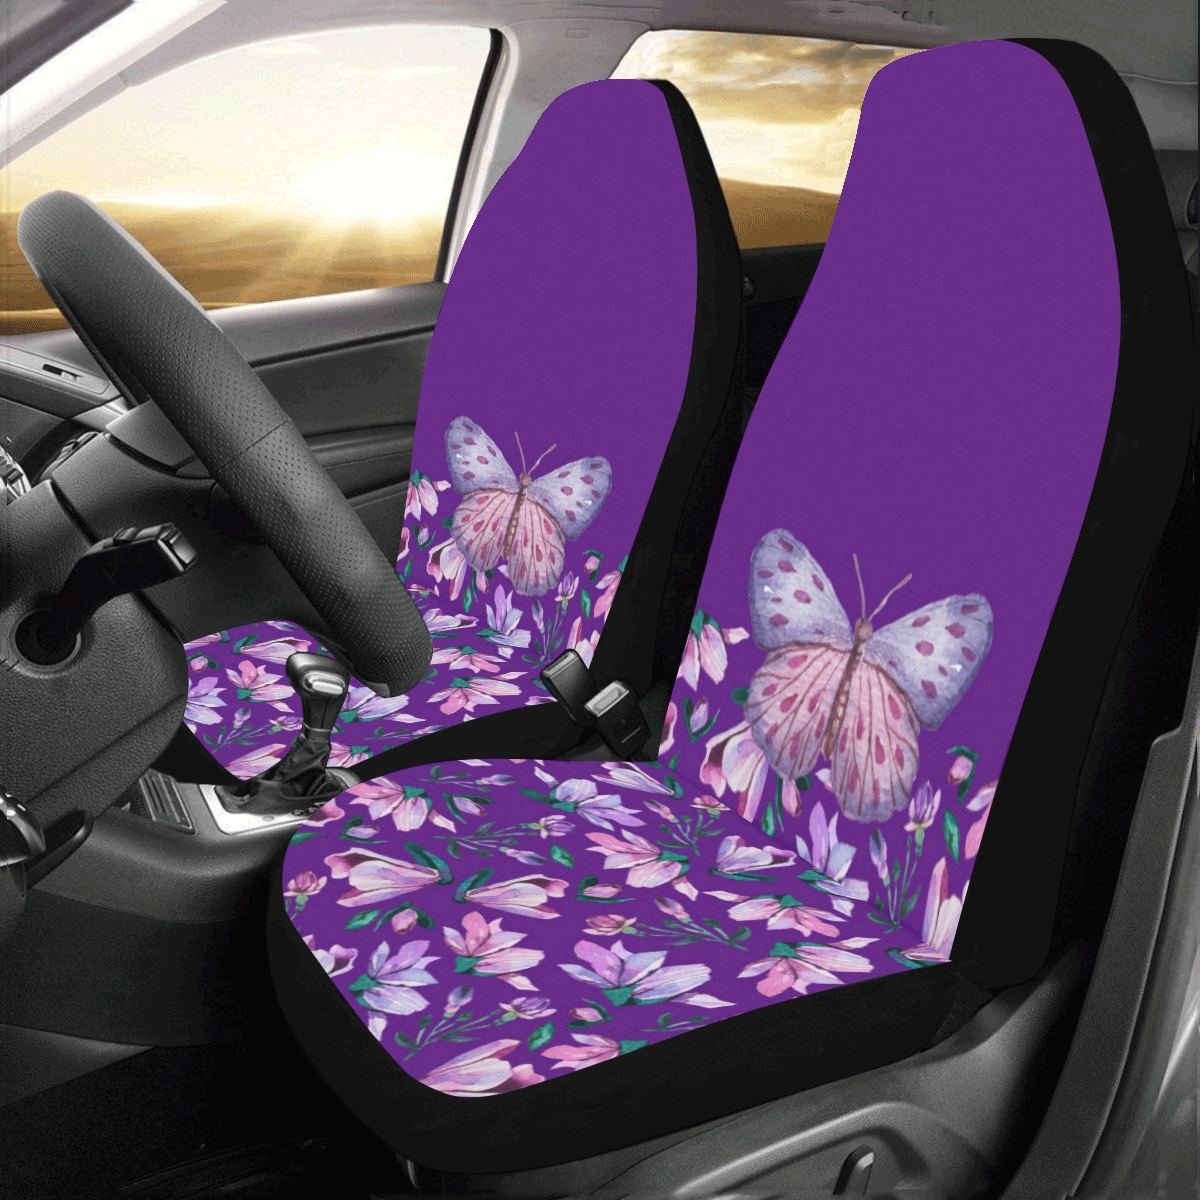 Purple Spring Butterfly Car Seat Covers (Set of 2)